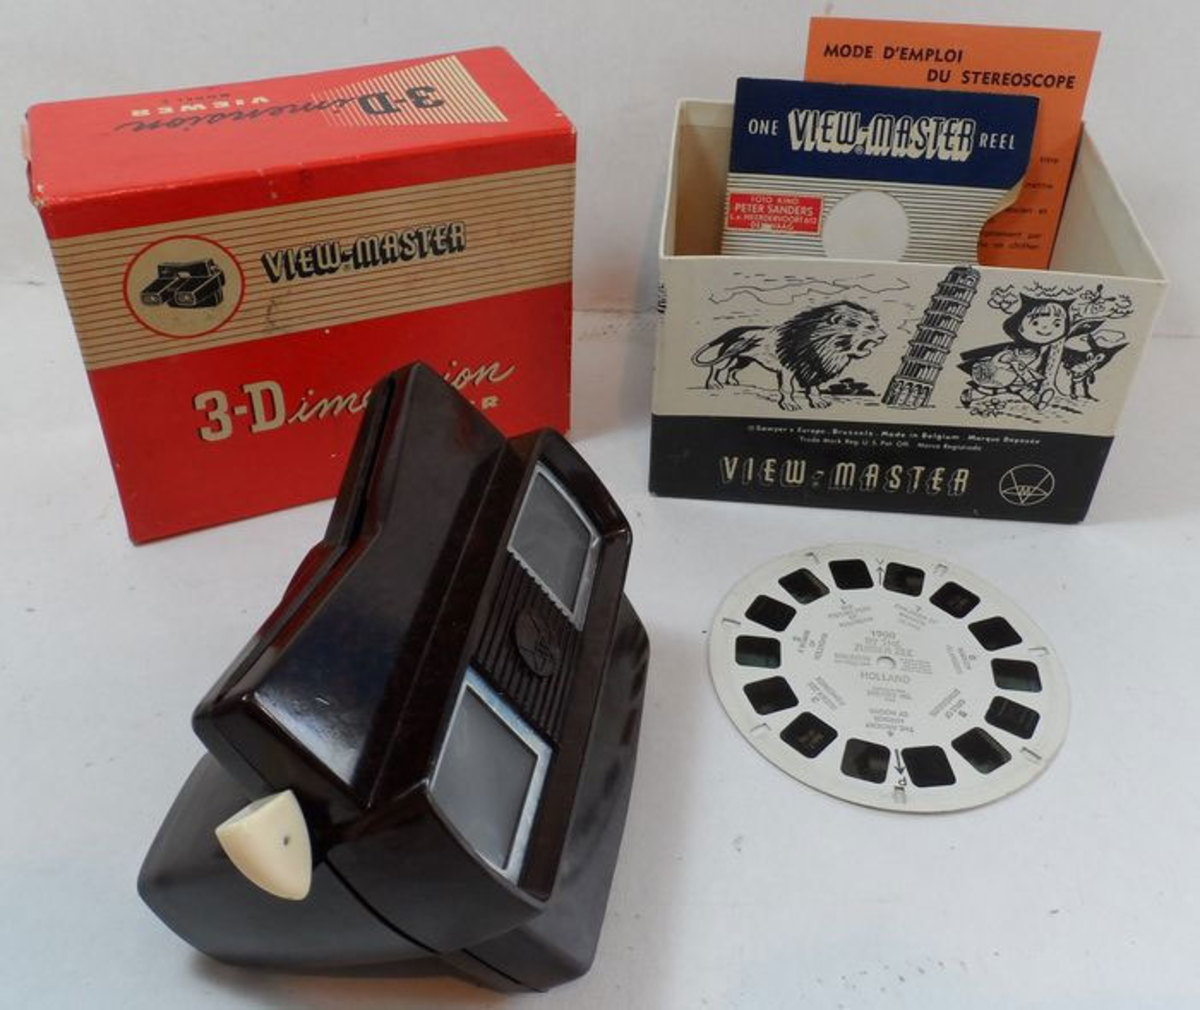 View-Master Storage Case for View-Master Blister Cards - red - vintage